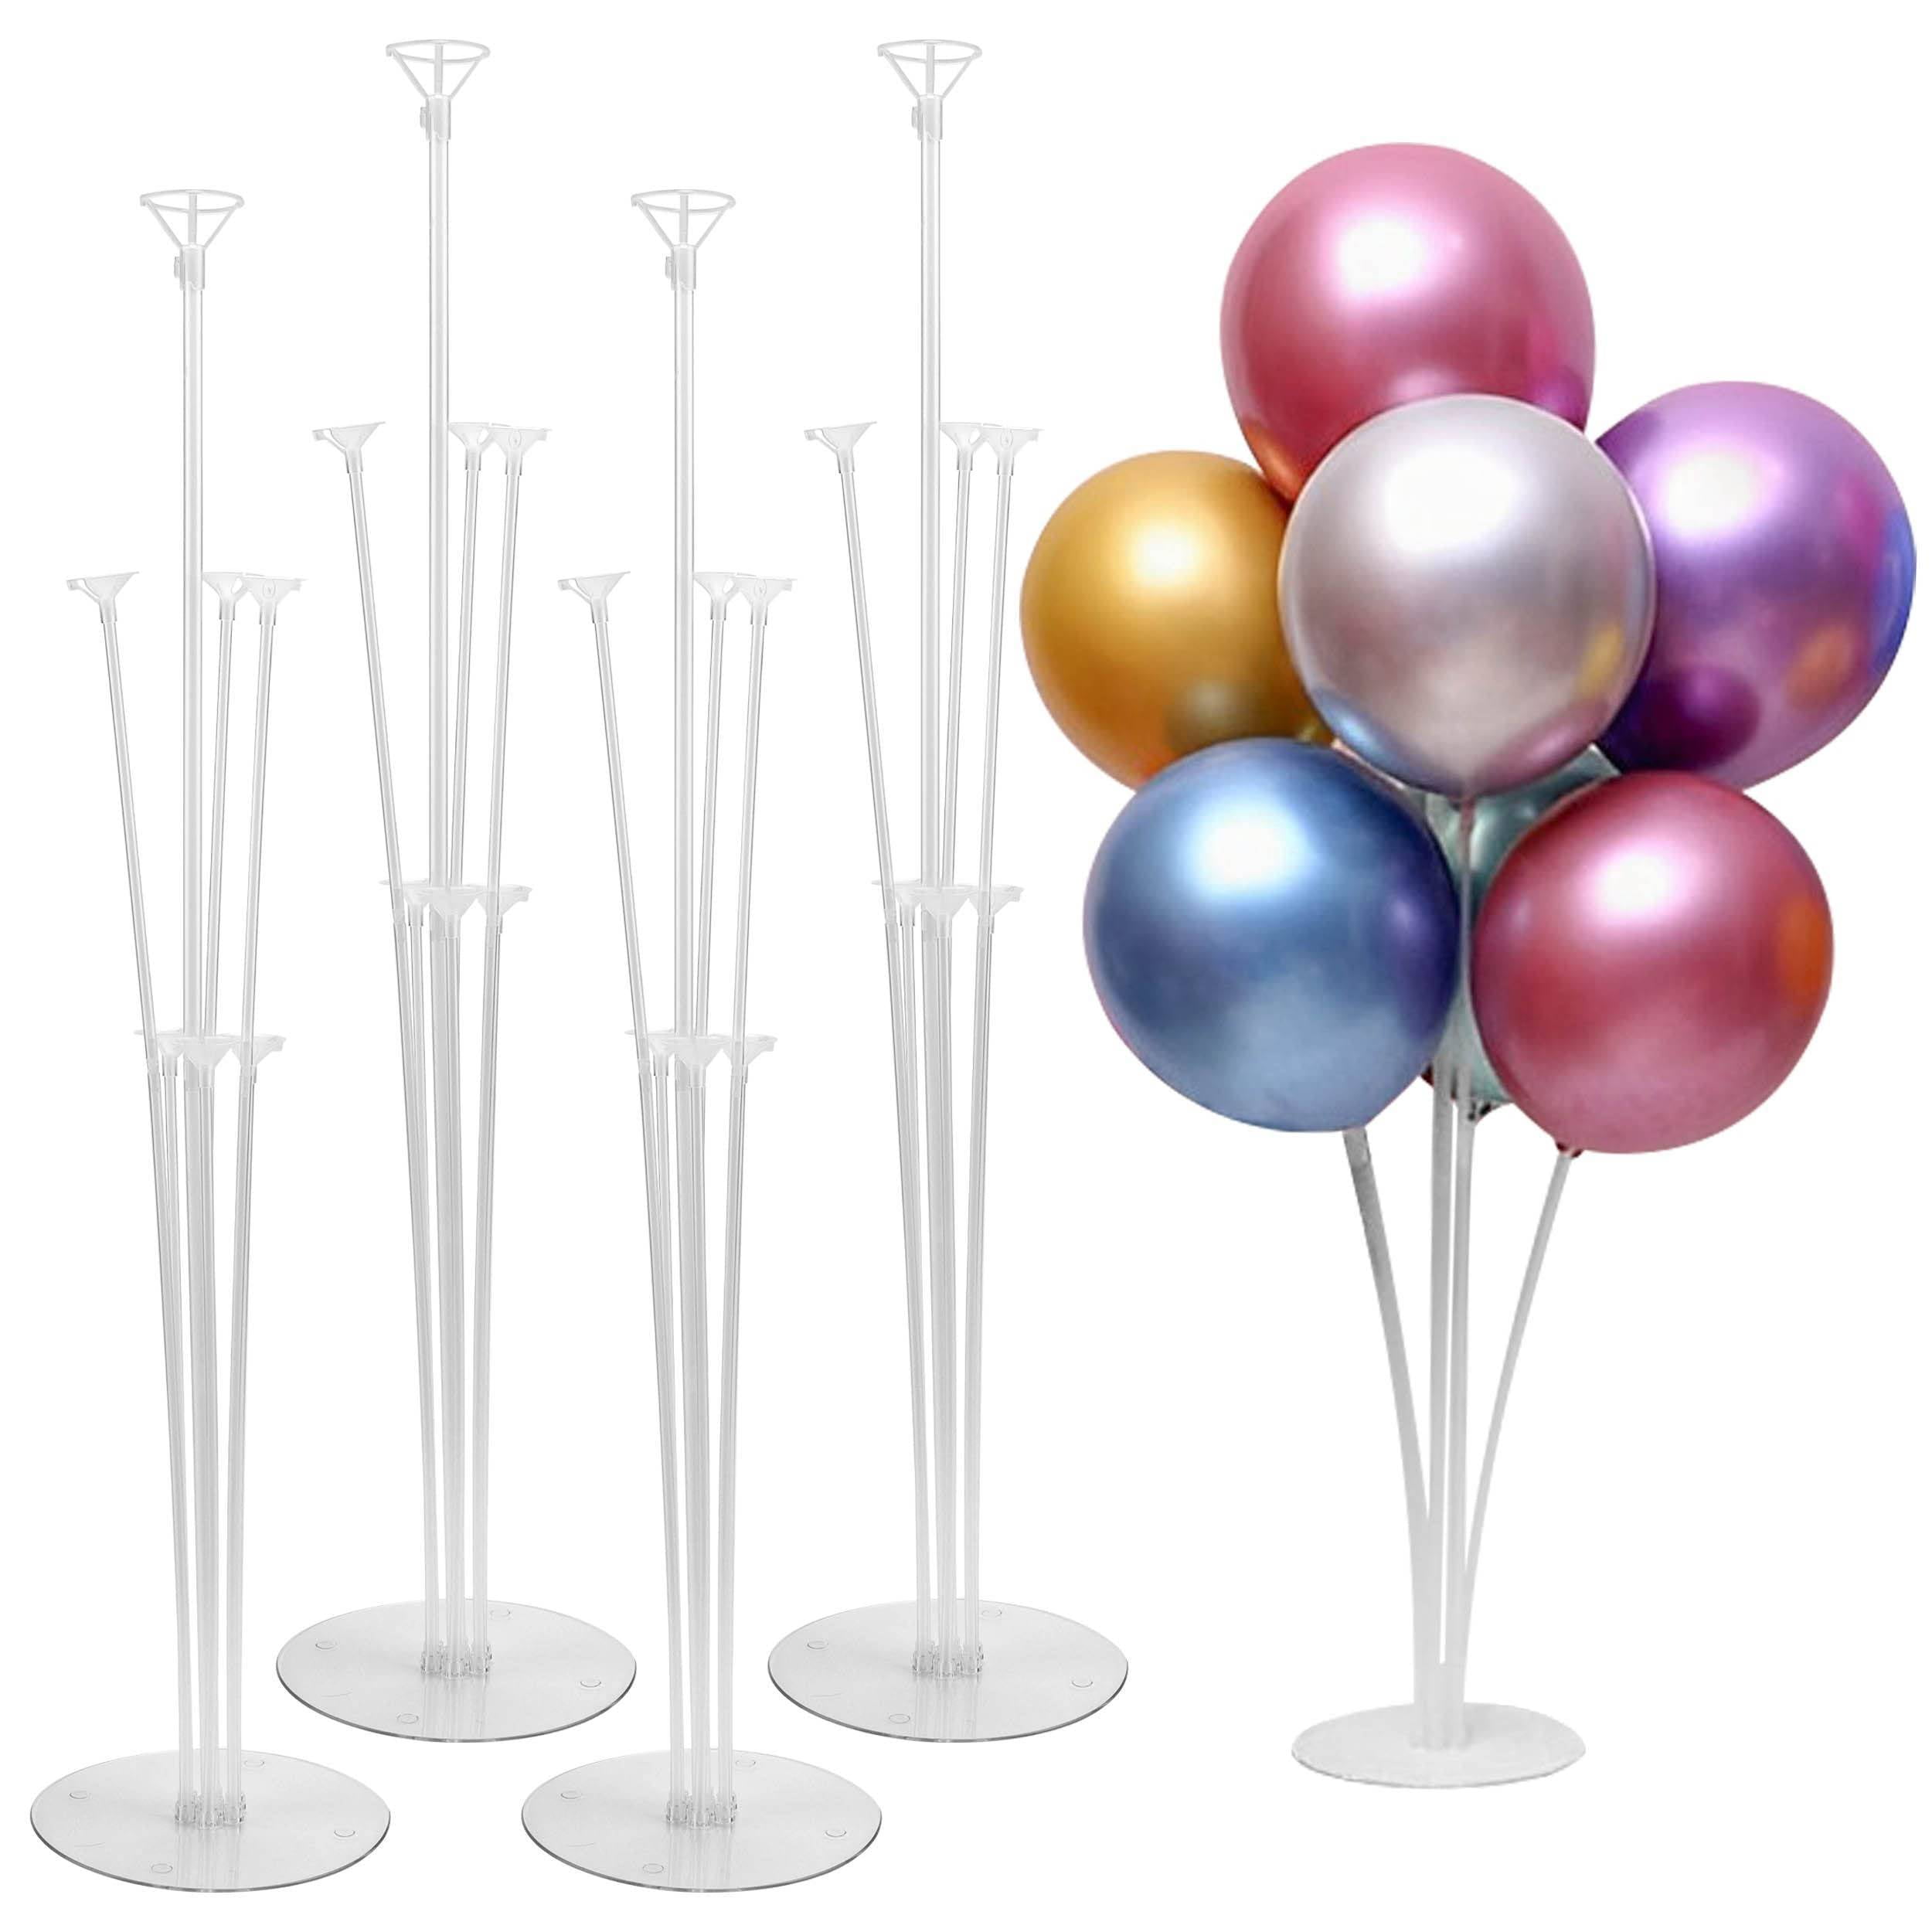 iMucci 4 Sets Balloon Stand Kit, Balloon Sticks Holder with Base for ...